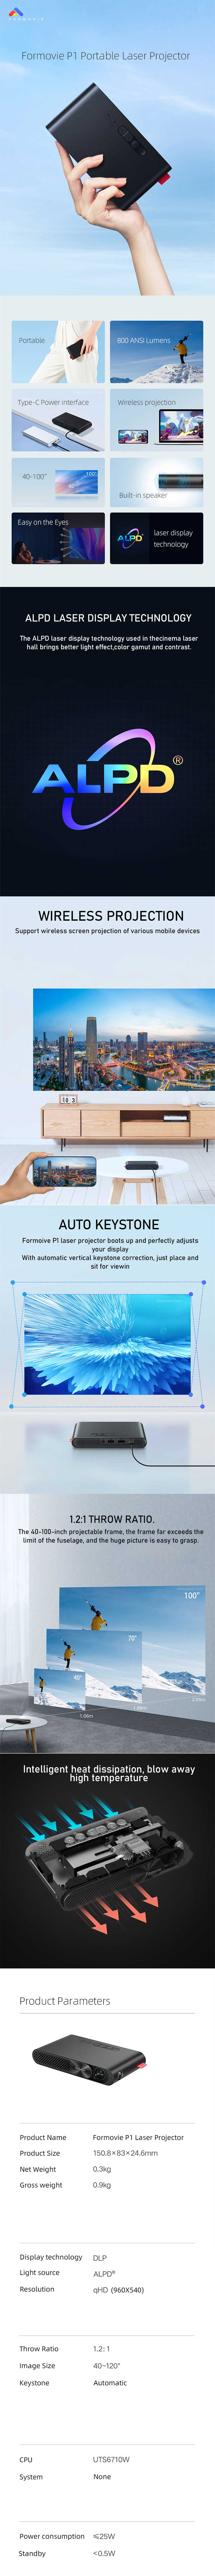 502€ with Coupon for FENGMI Formovie P1 Pocket ALPD Laser Projector 800 ANSI - BANGGOOD